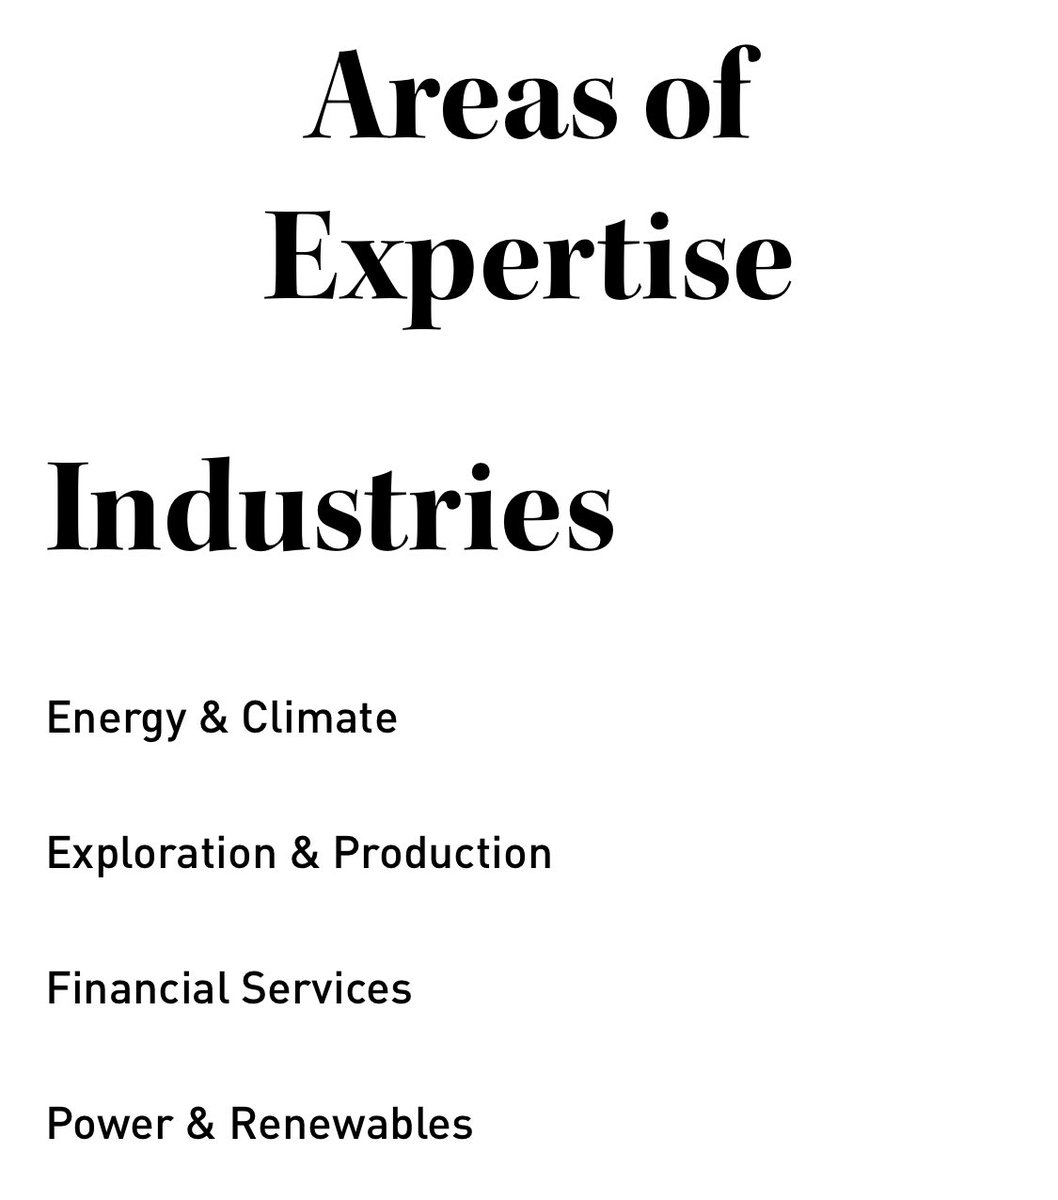 Also, their election “expert” from those paragraphs 9-12 appears to be a (former?) economics professor whose specialty is energy markets and regulation.  https://www.thinkbrg.com/people/charles-cicchetti/